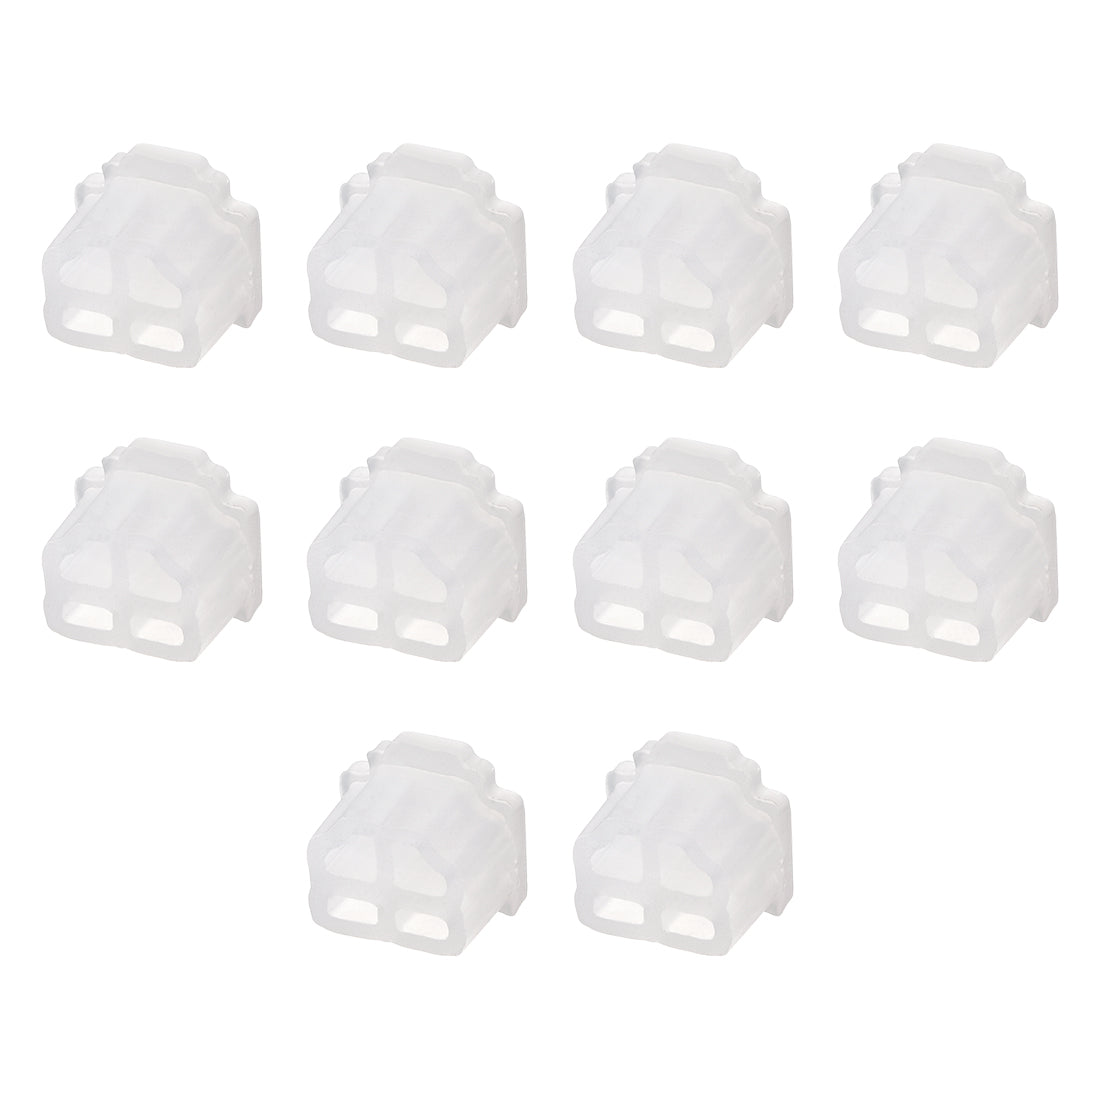 uxcell Uxcell Silicone Telephone Modular Port RJ11 Anti-Dust Stopper Cap Cover Clear 10pcs